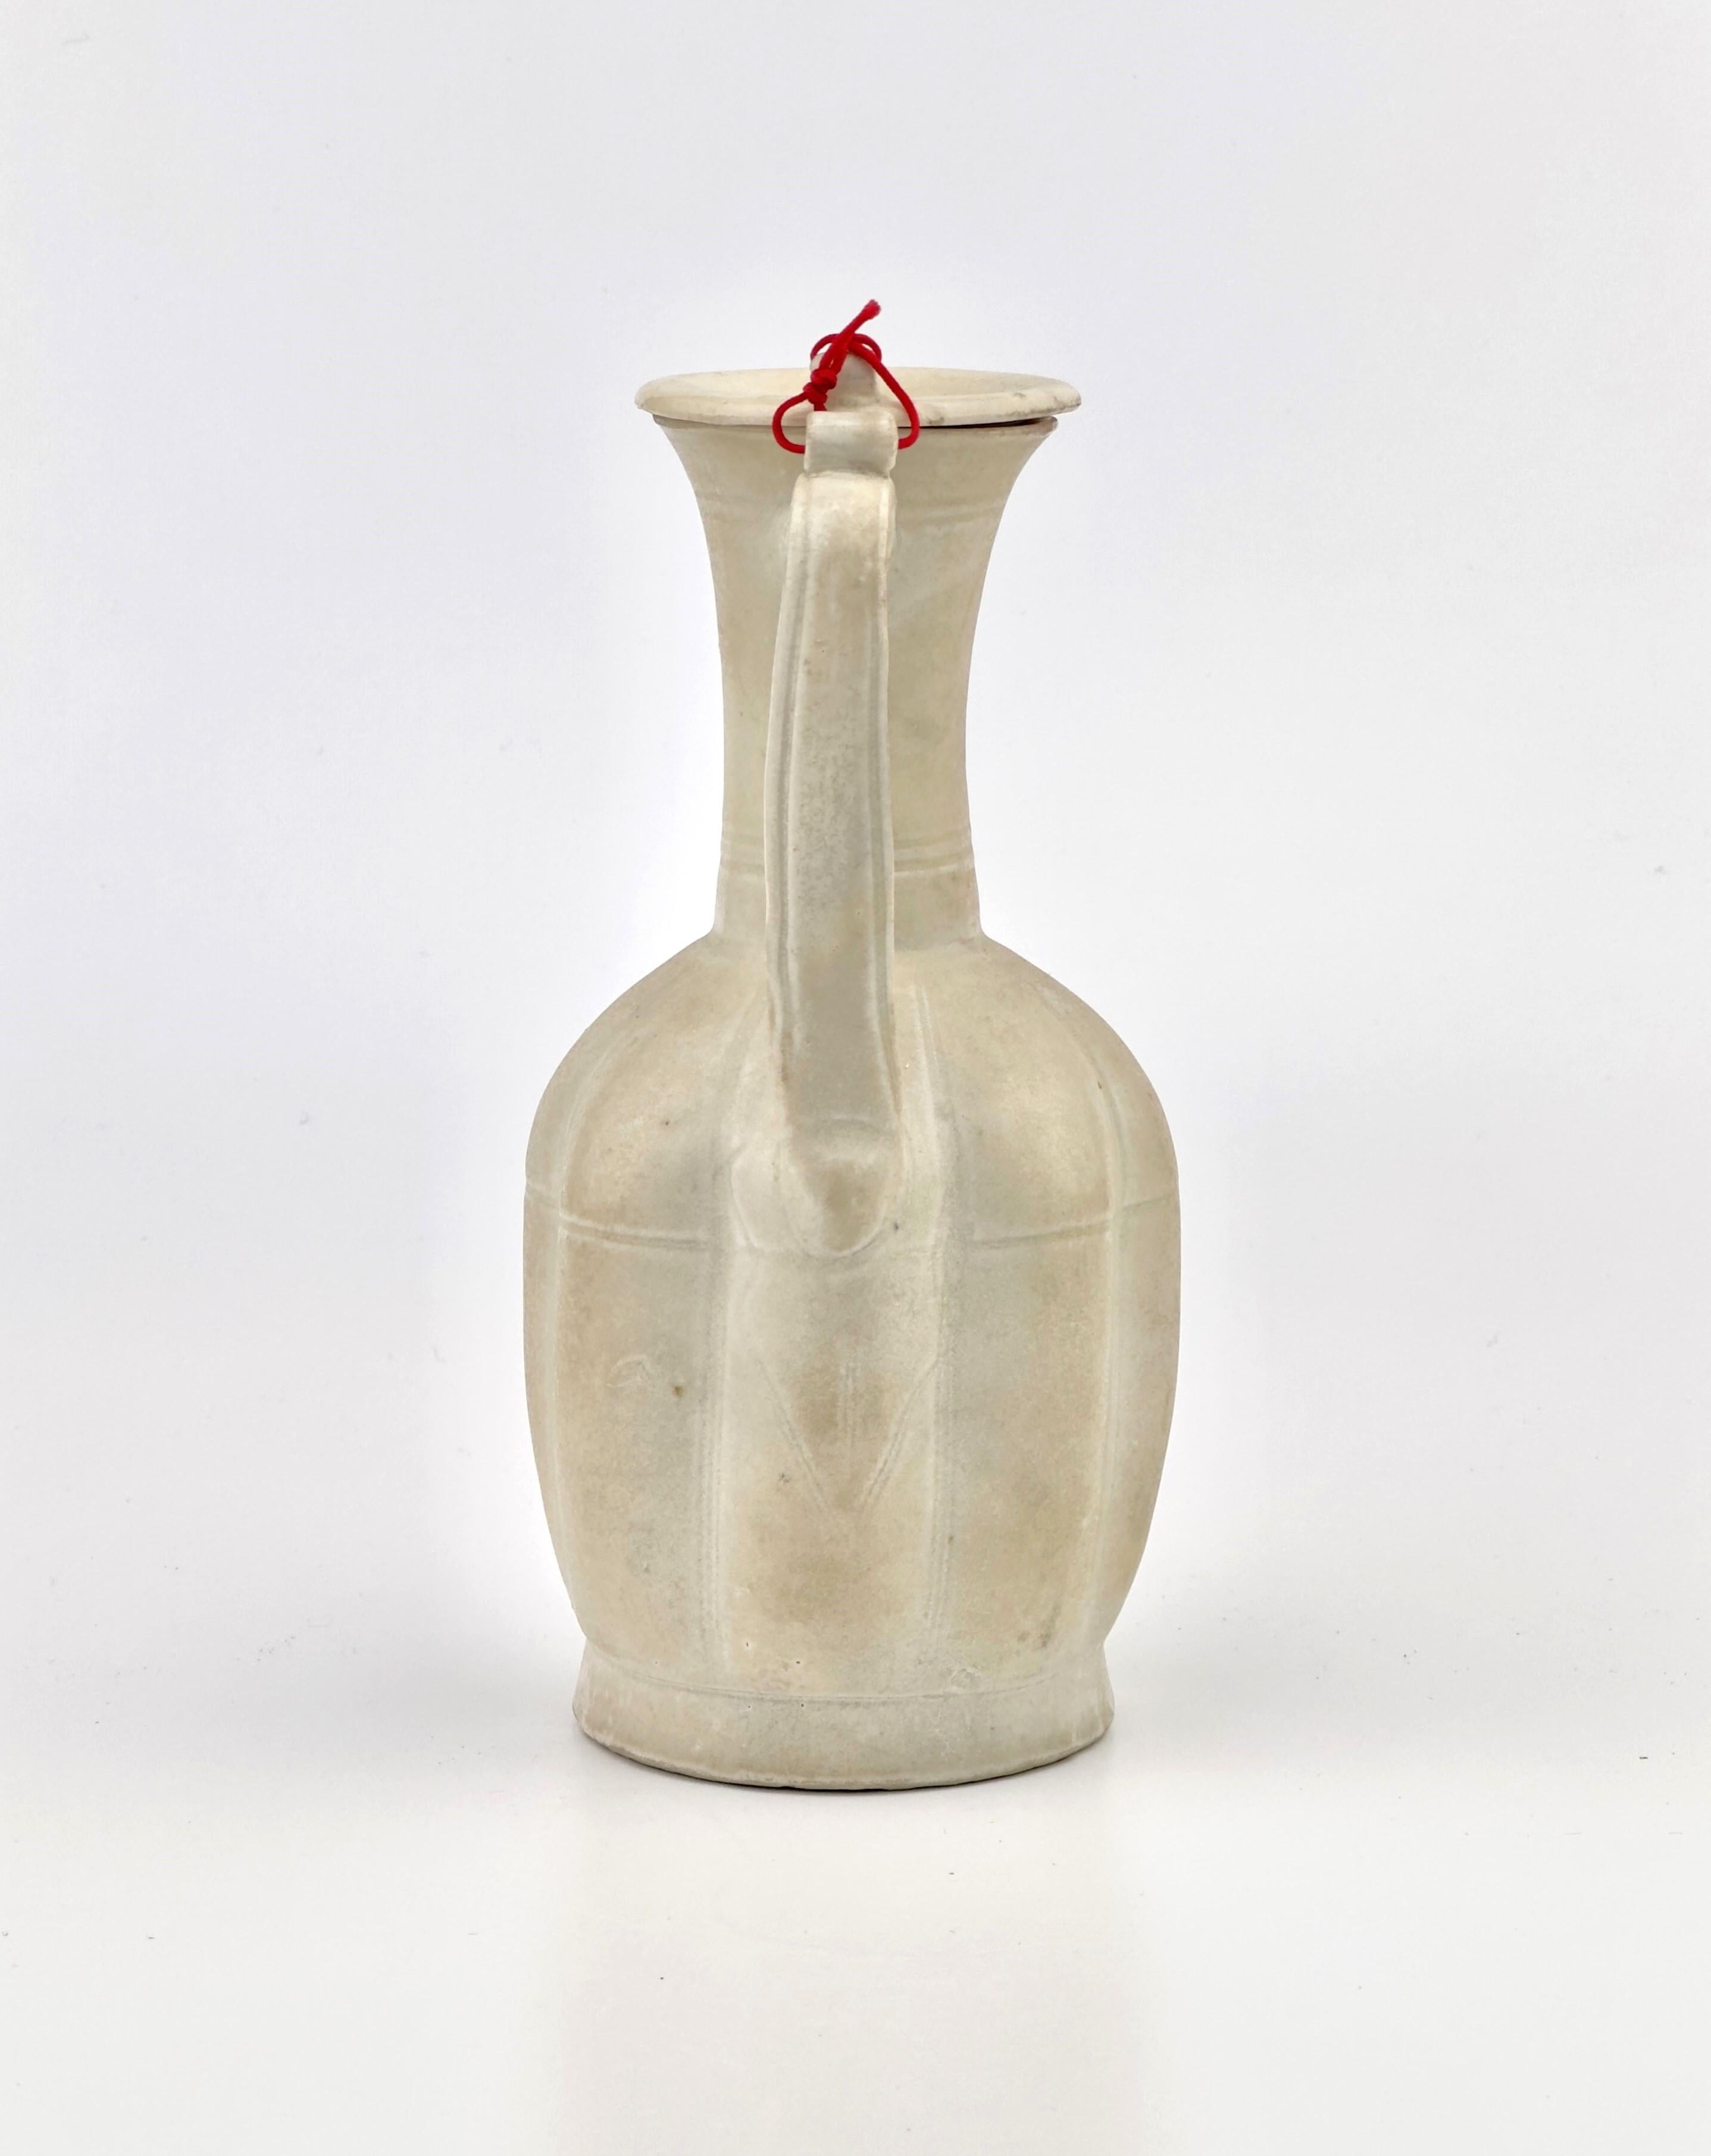 This is a Song Dynasty ceramic ewer, exhibiting the characteristic simplicity and elegance of the period. The ewer's form is sturdy with a full-bodied base that tapers gently to a narrow neck, expanding again at the mouth. The handle is gracefully